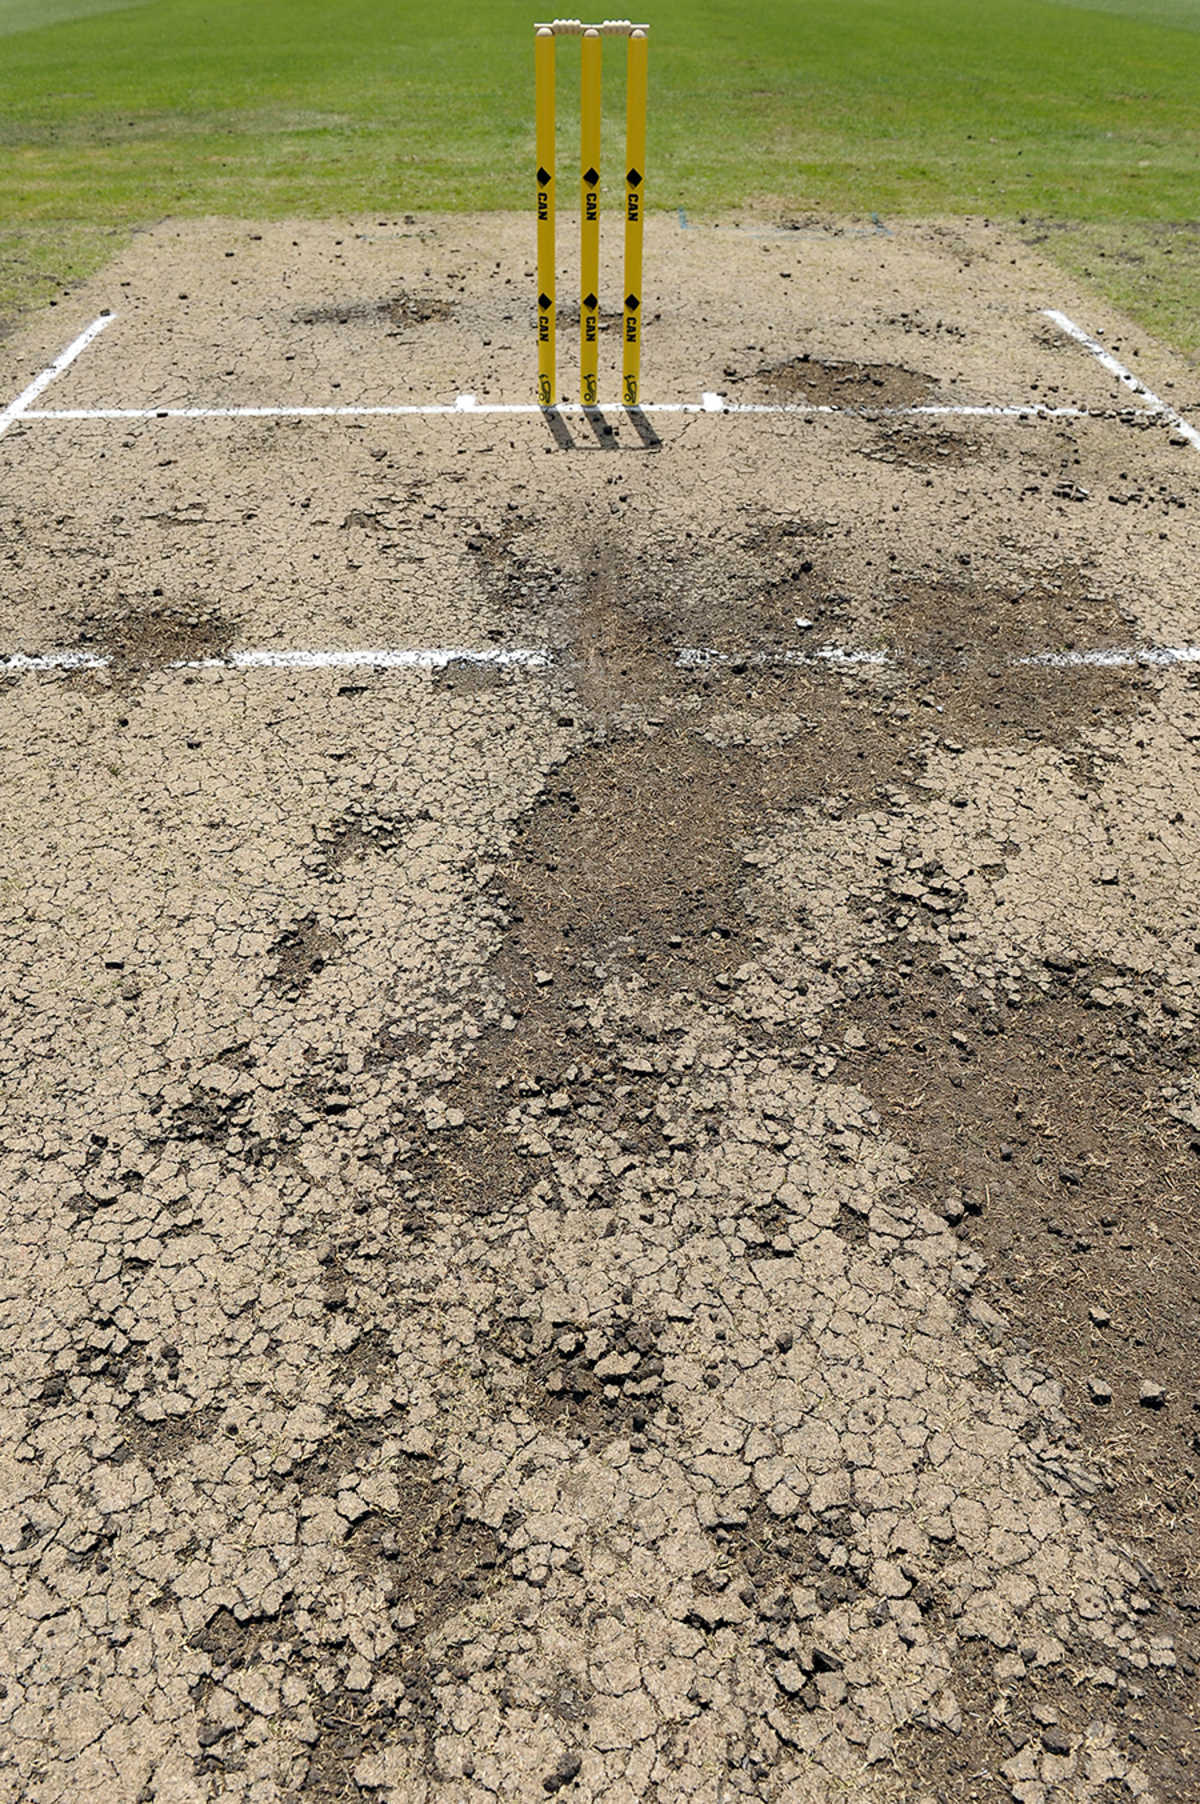 The pitch for the New Zealanders' tour game shows signs of deterioration, Cricket Australia XI v New Zealand, Sydney, 2nd day, October 30, 2015